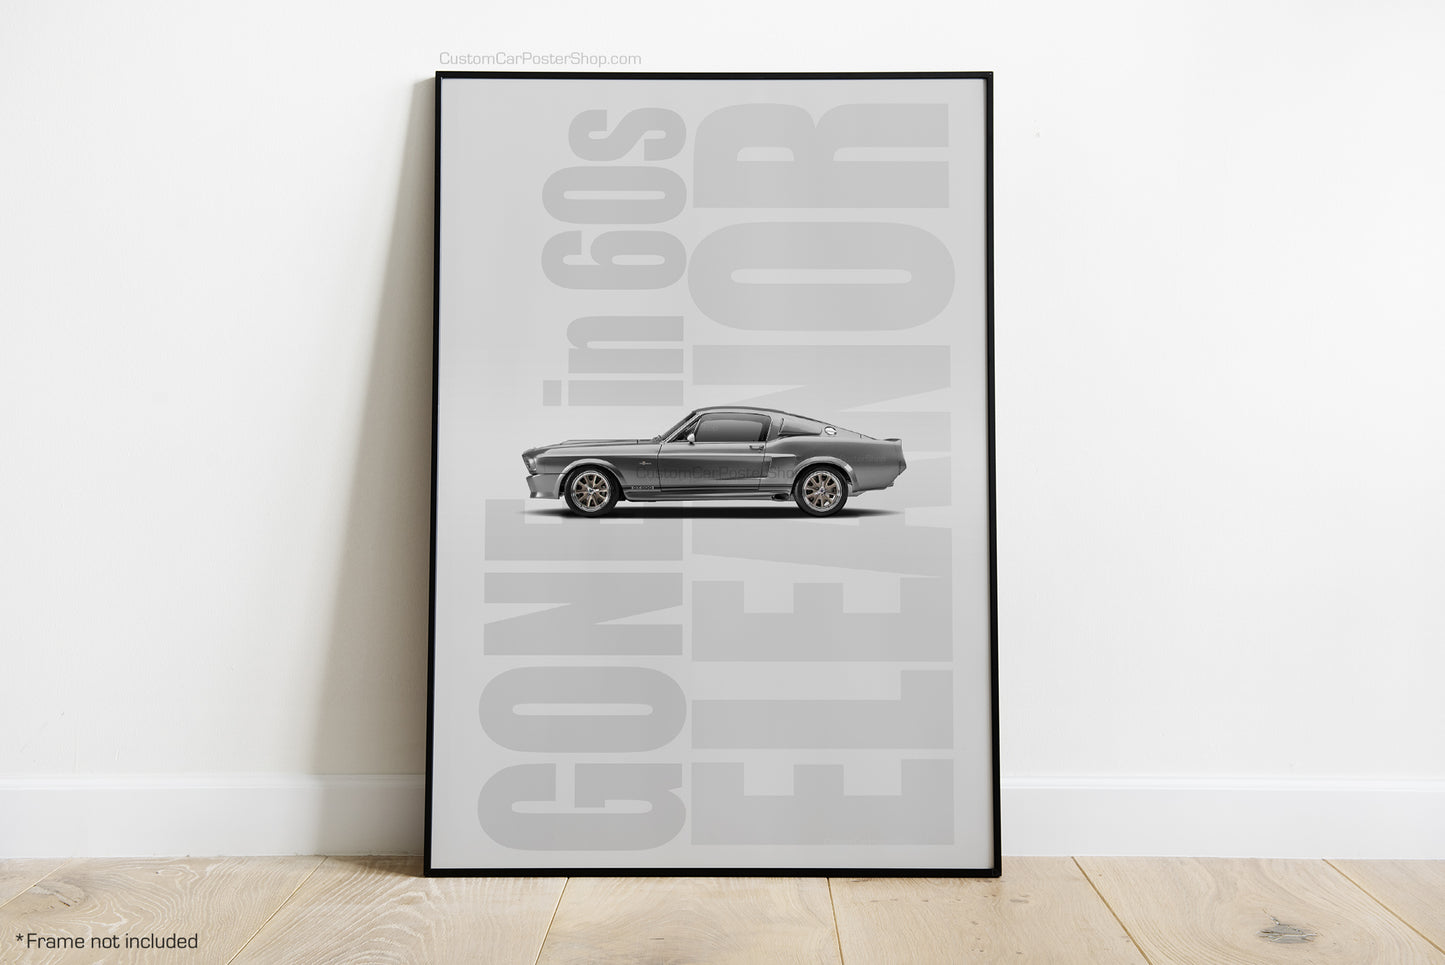 Gone in 60 SECONDS - Ford Shelby GT500 Mustang Wall Art - Movie Cars